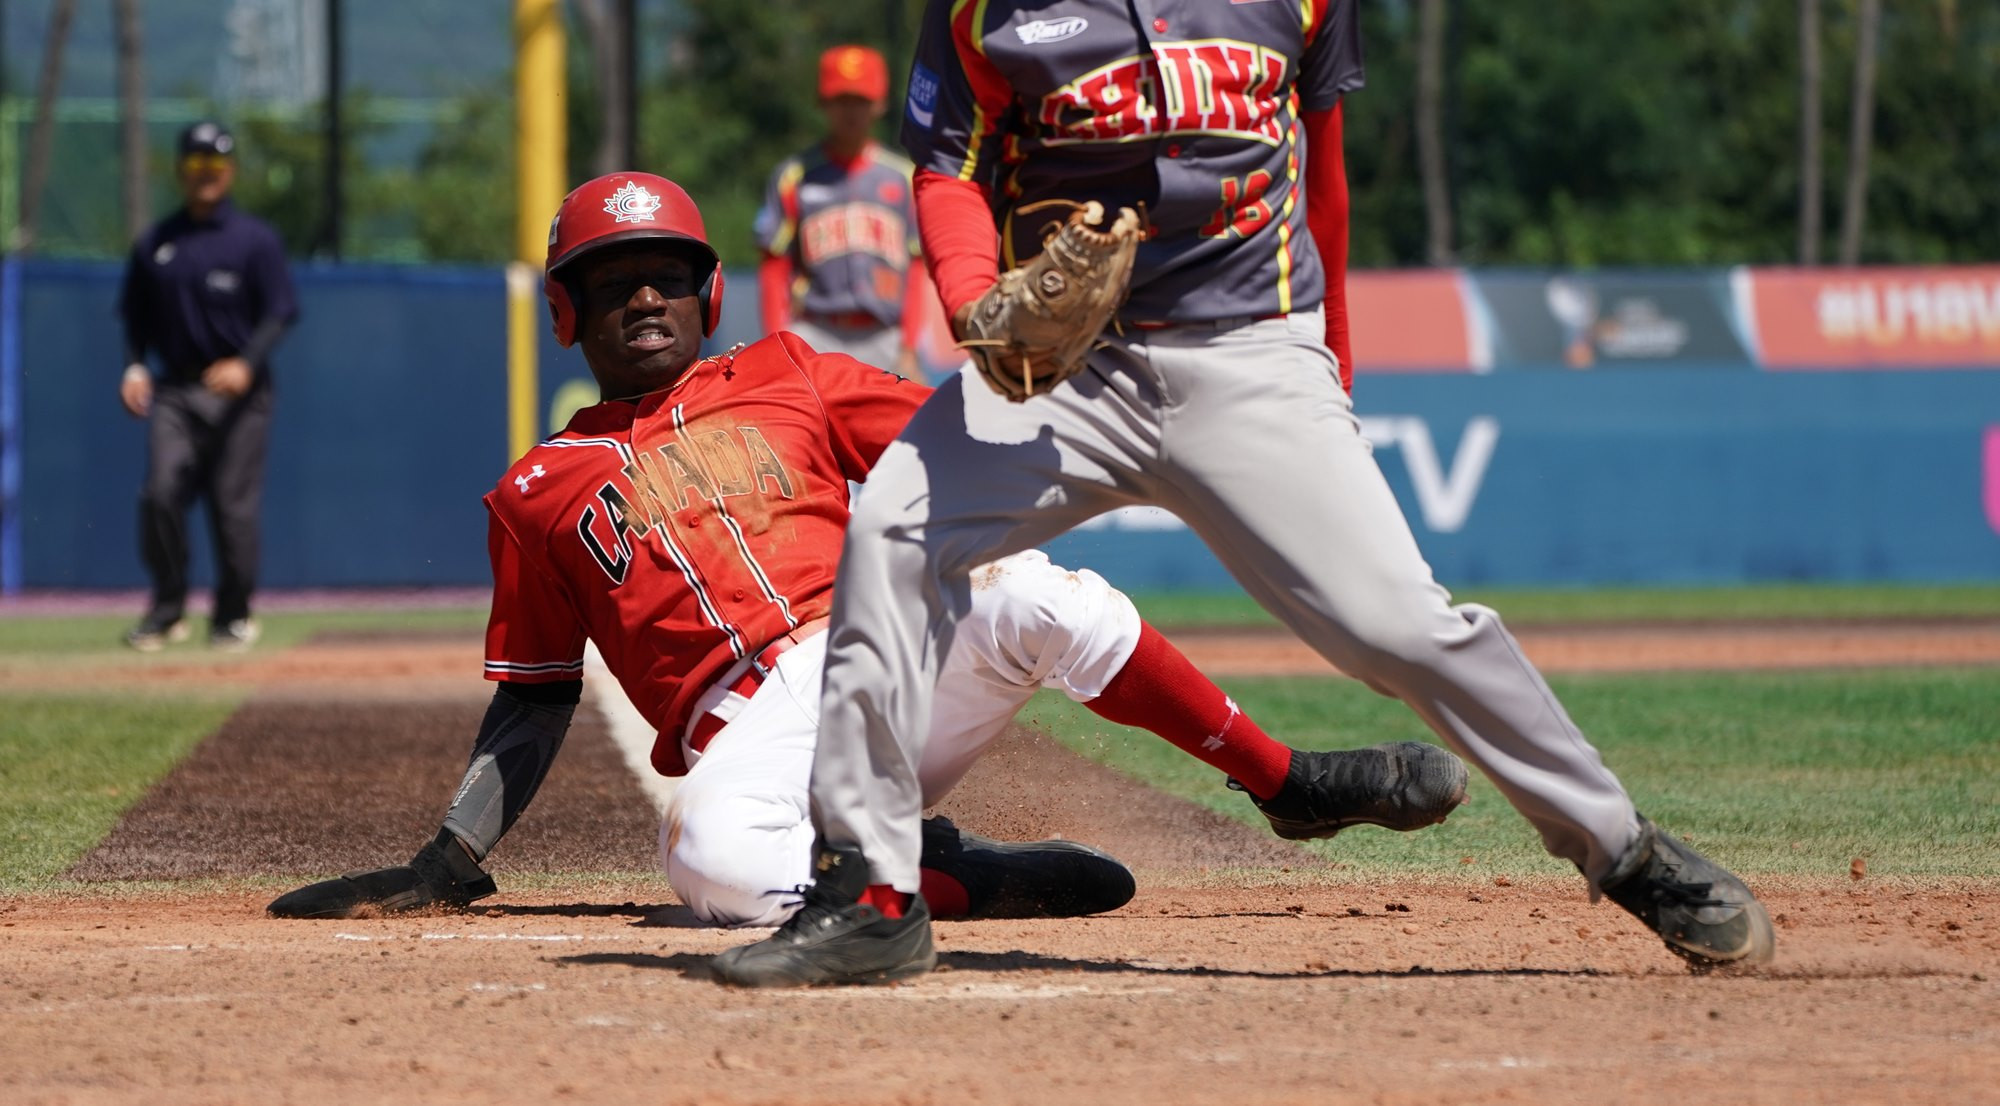 United States thrash South Africa at WBSC Under-18 Baseball World Cup